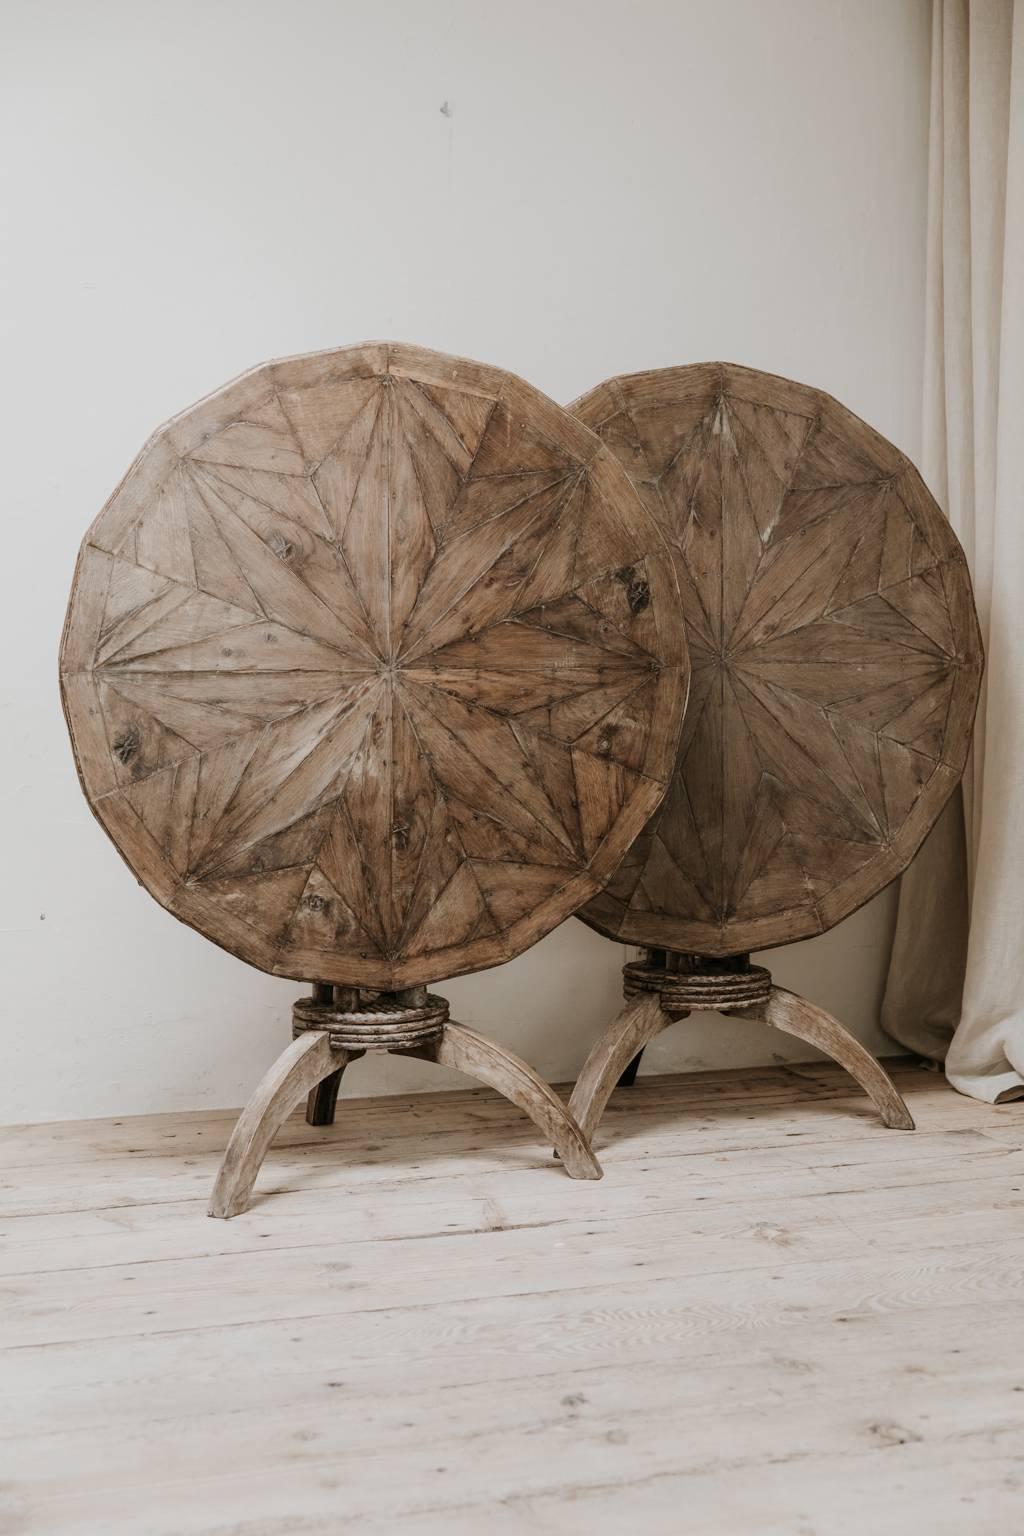 A stunning pair of 16 sided starburst oak and twig tables, fine cabinetmaking, lovely patina, measures: 100 cm wide x 76 cm high and 130 cm high when tilt-top lift up